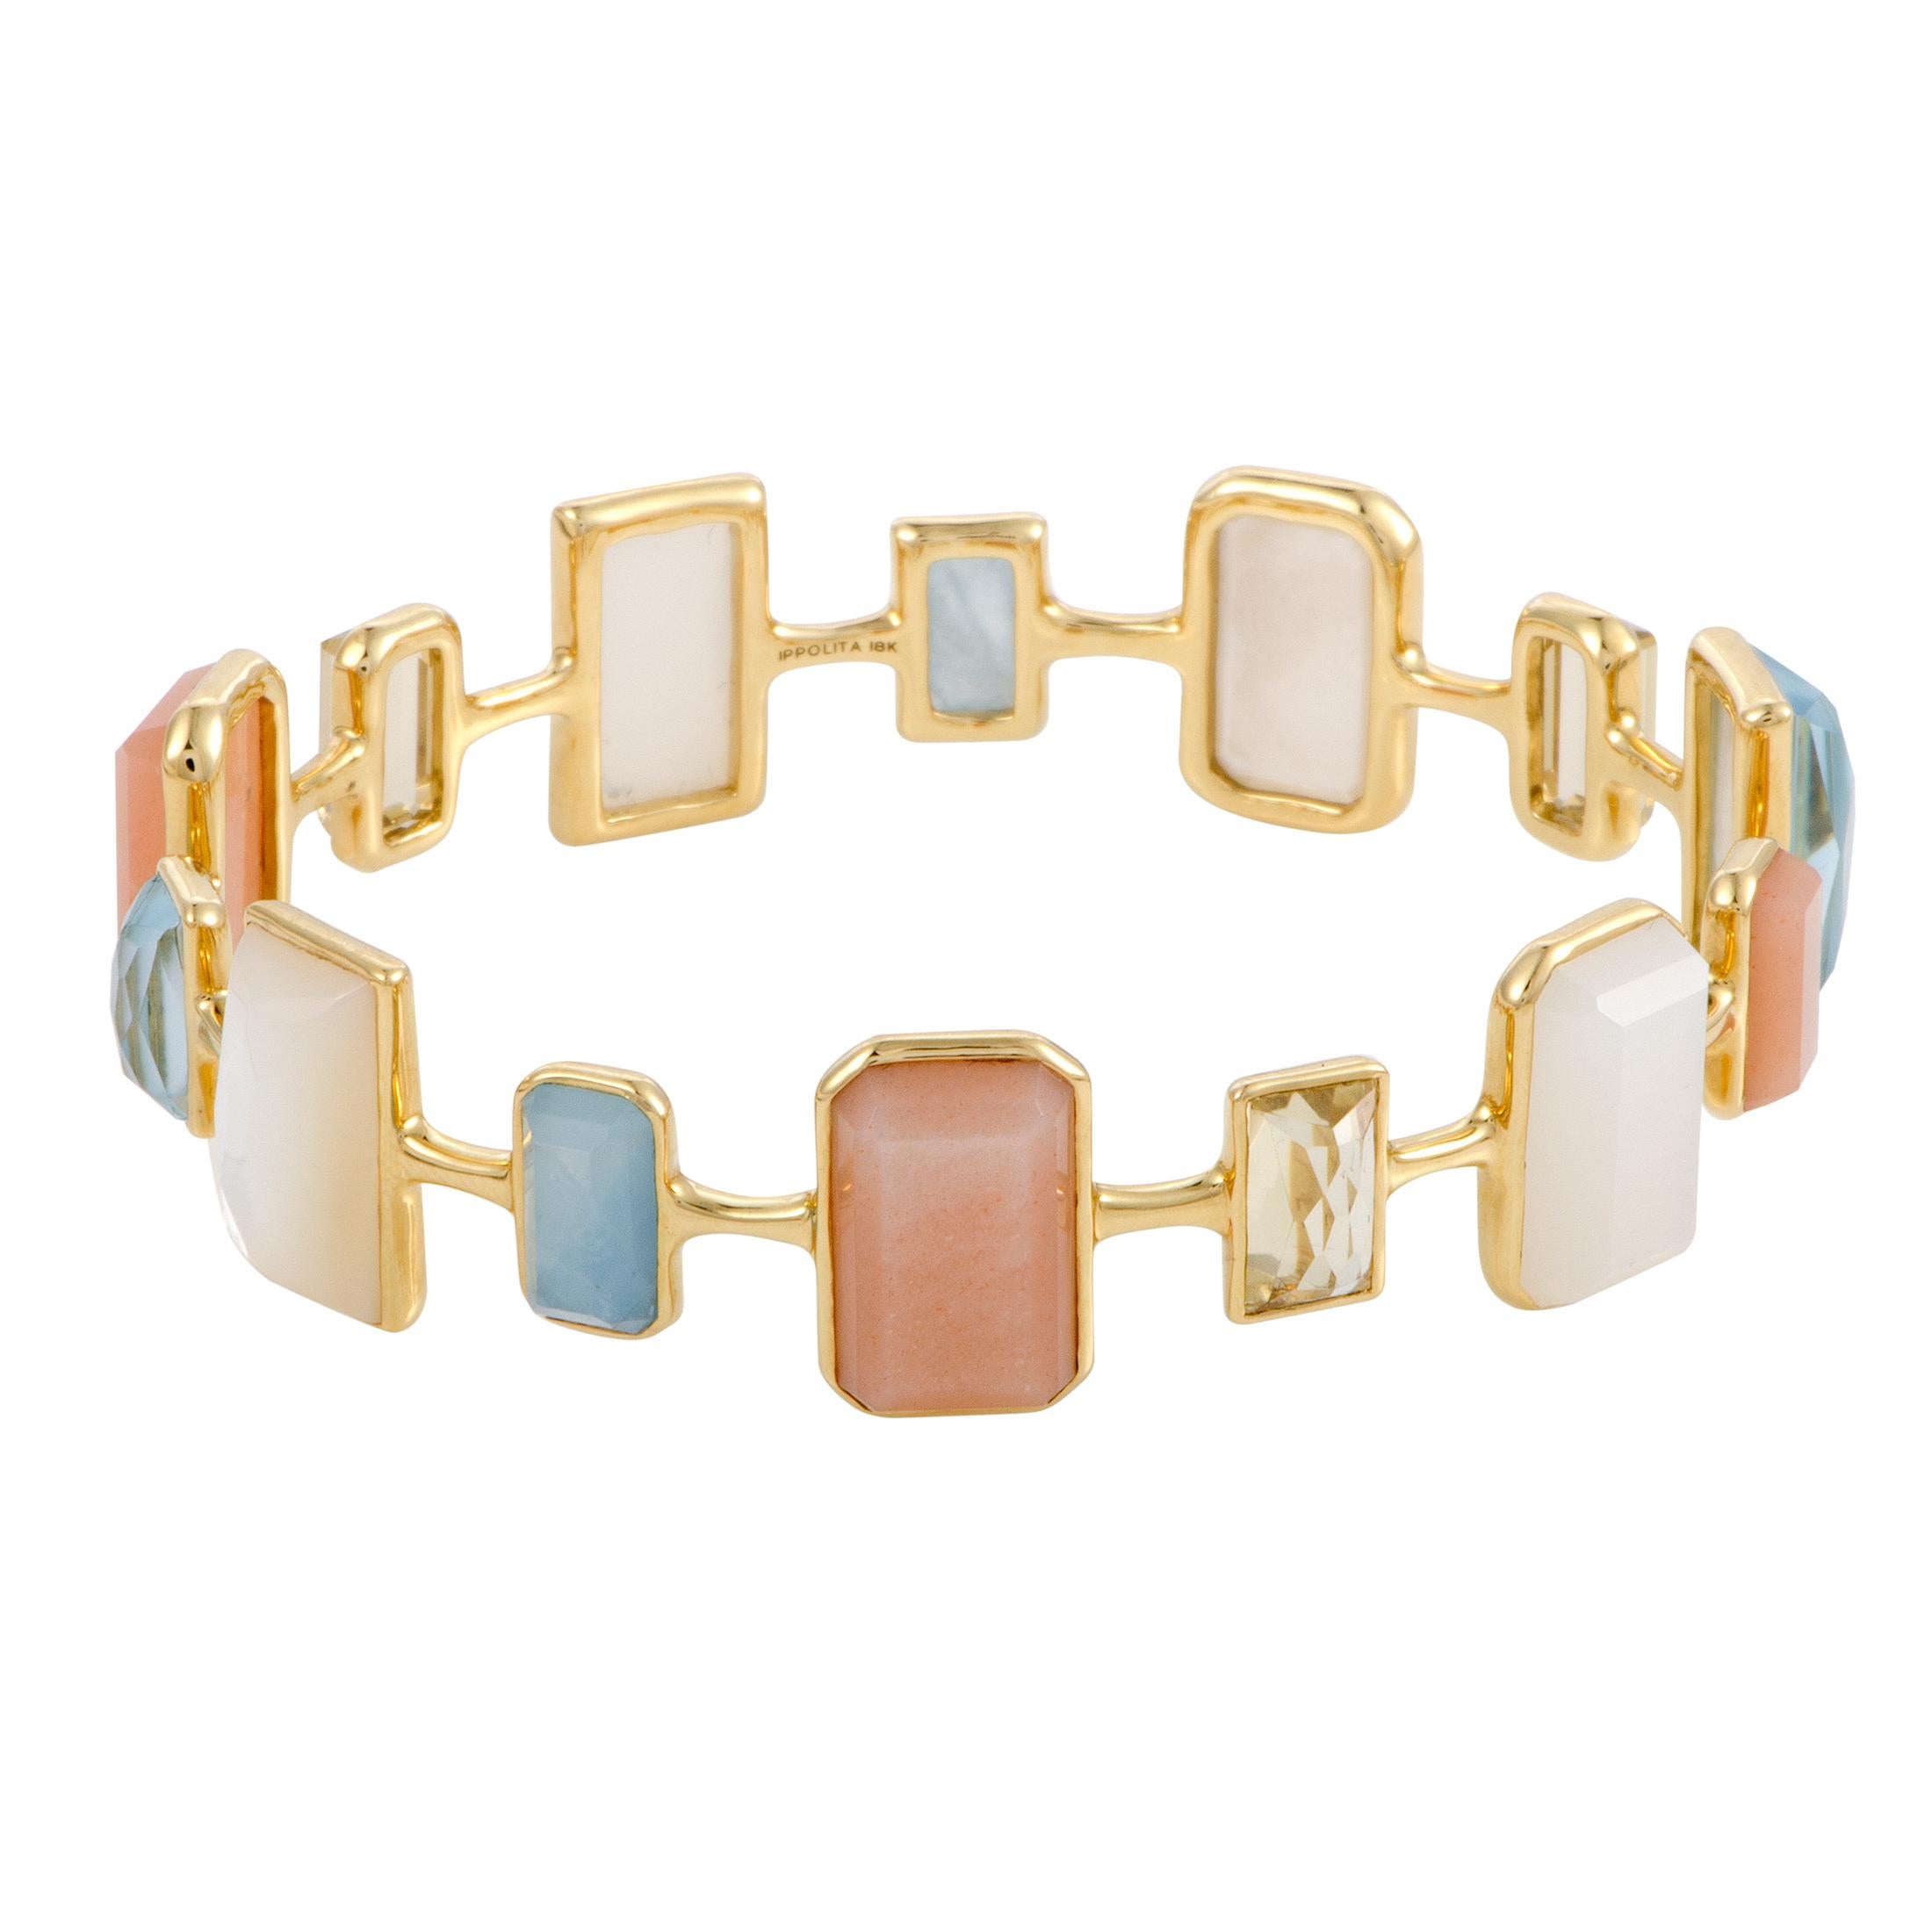 Rock Candy 18 Karat Gold Multicolored Stones and Mother of Pearl Bangle Bracelet